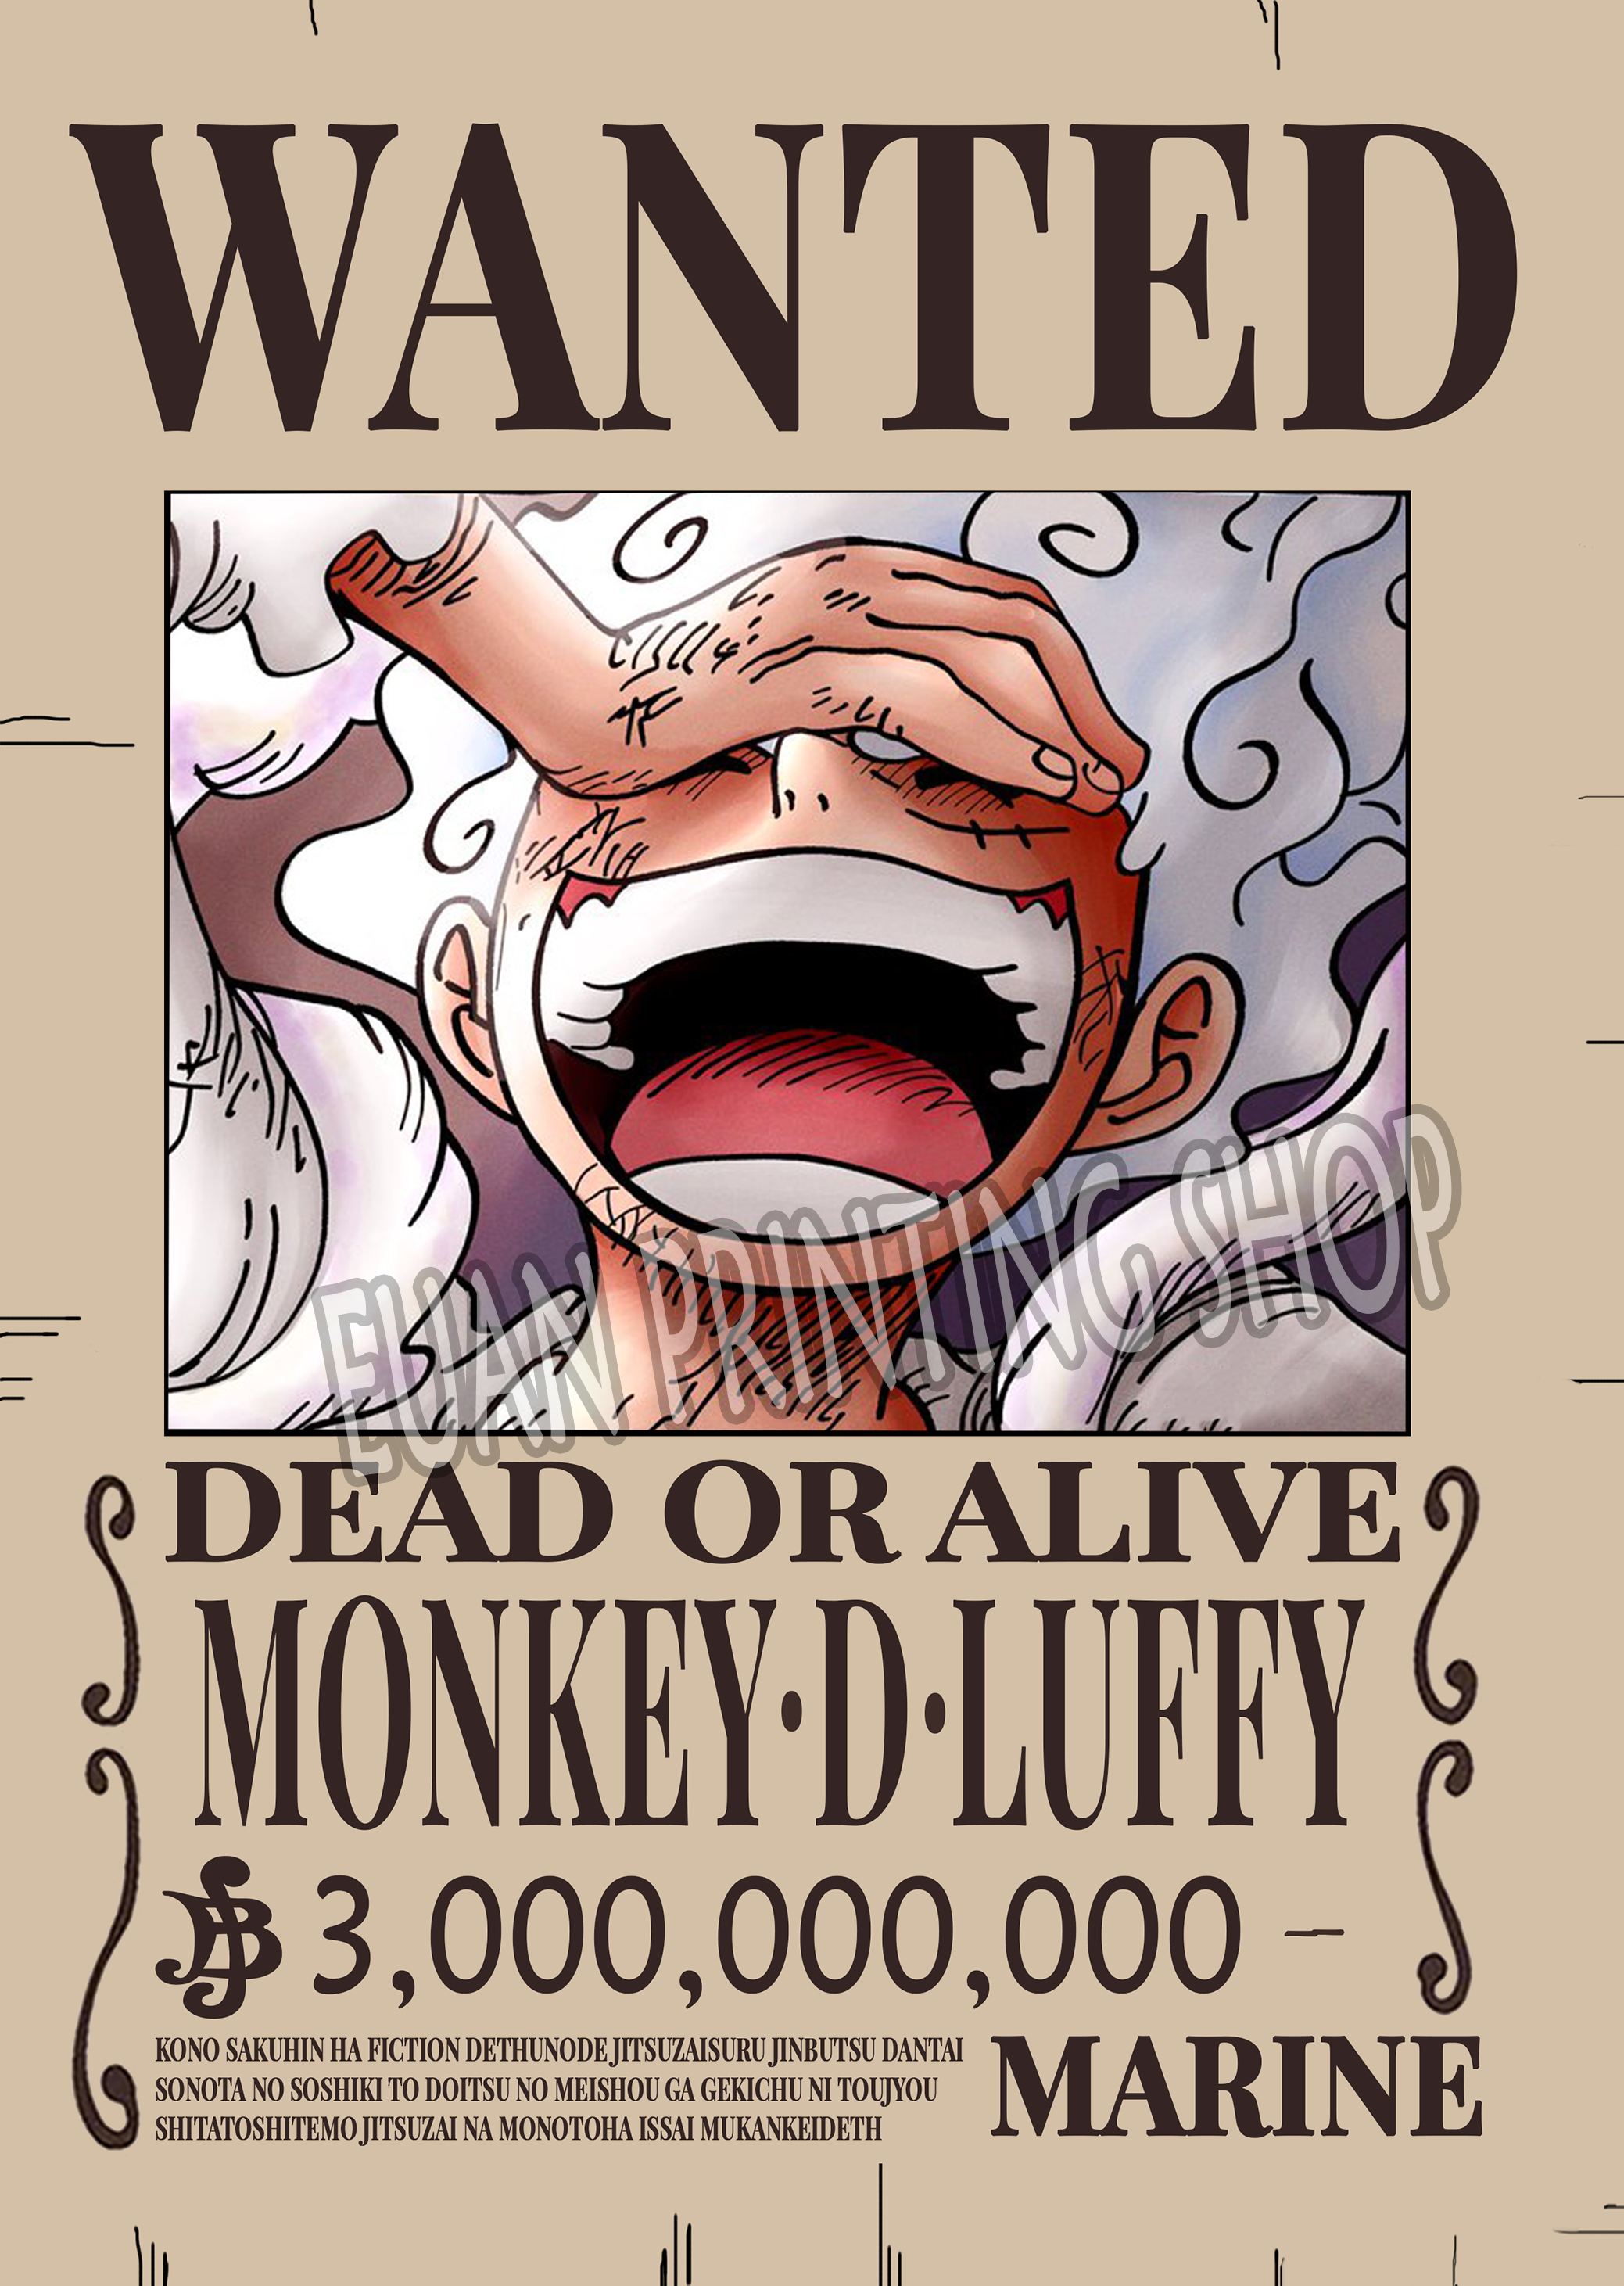 one-piece-hd-updated-bounty-wanted-posters-21cm-x-29-7cm-3pcs-minimum